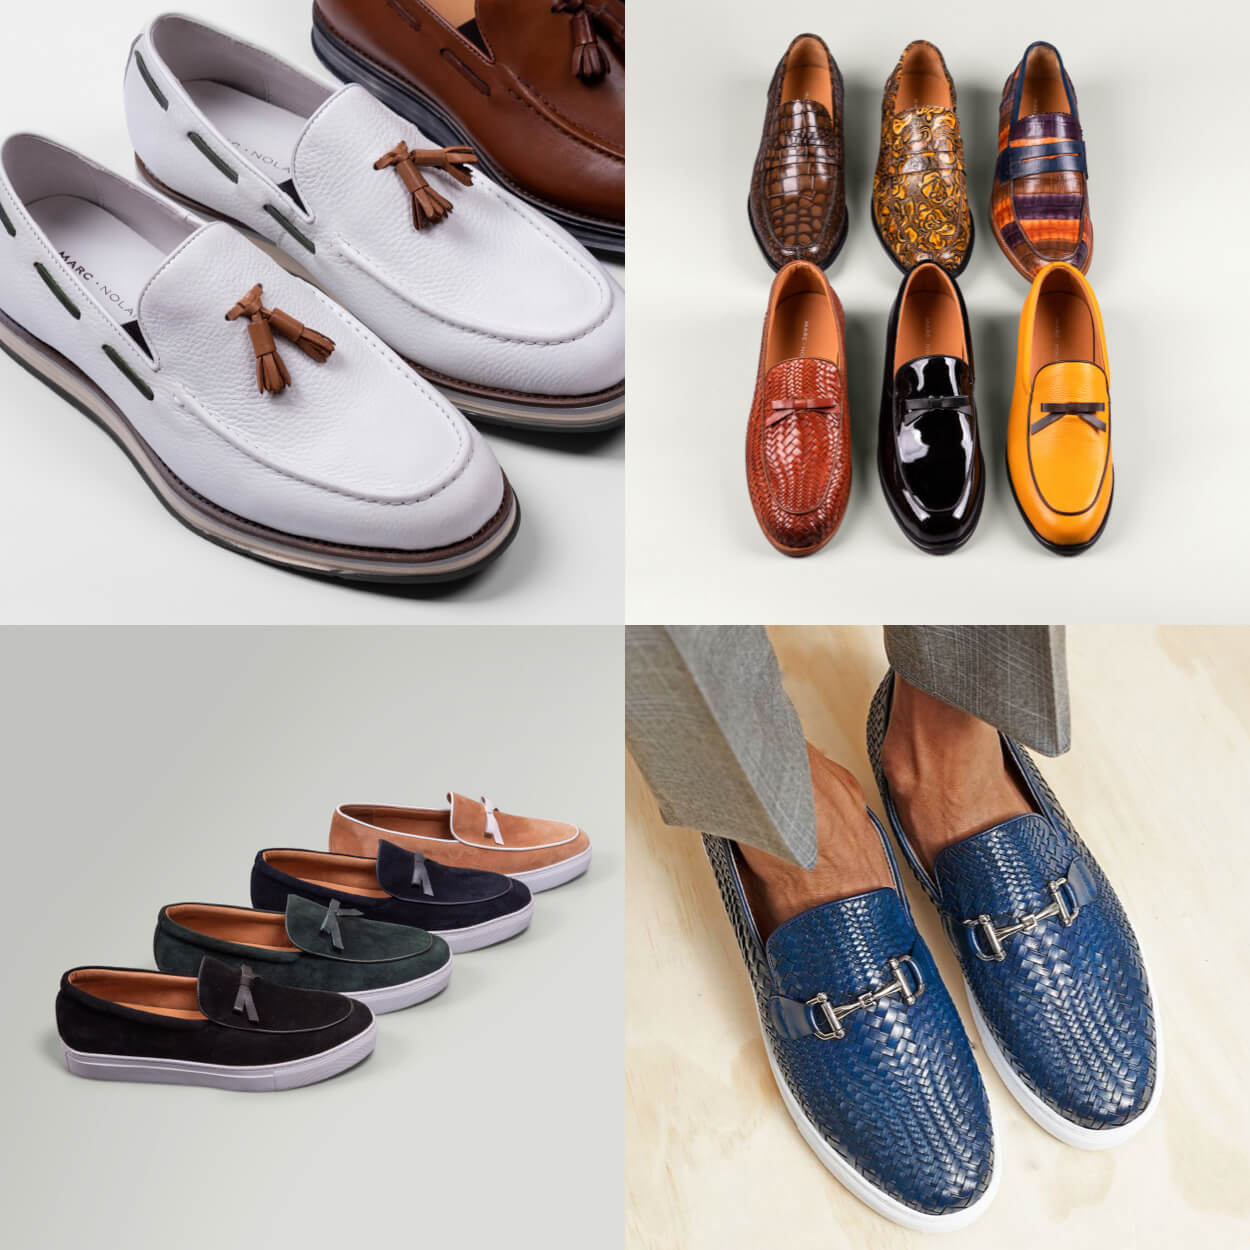 Best Men's Loafers - Penny Loafers, Belgian Loafers, Horse-Bit Loafers ...